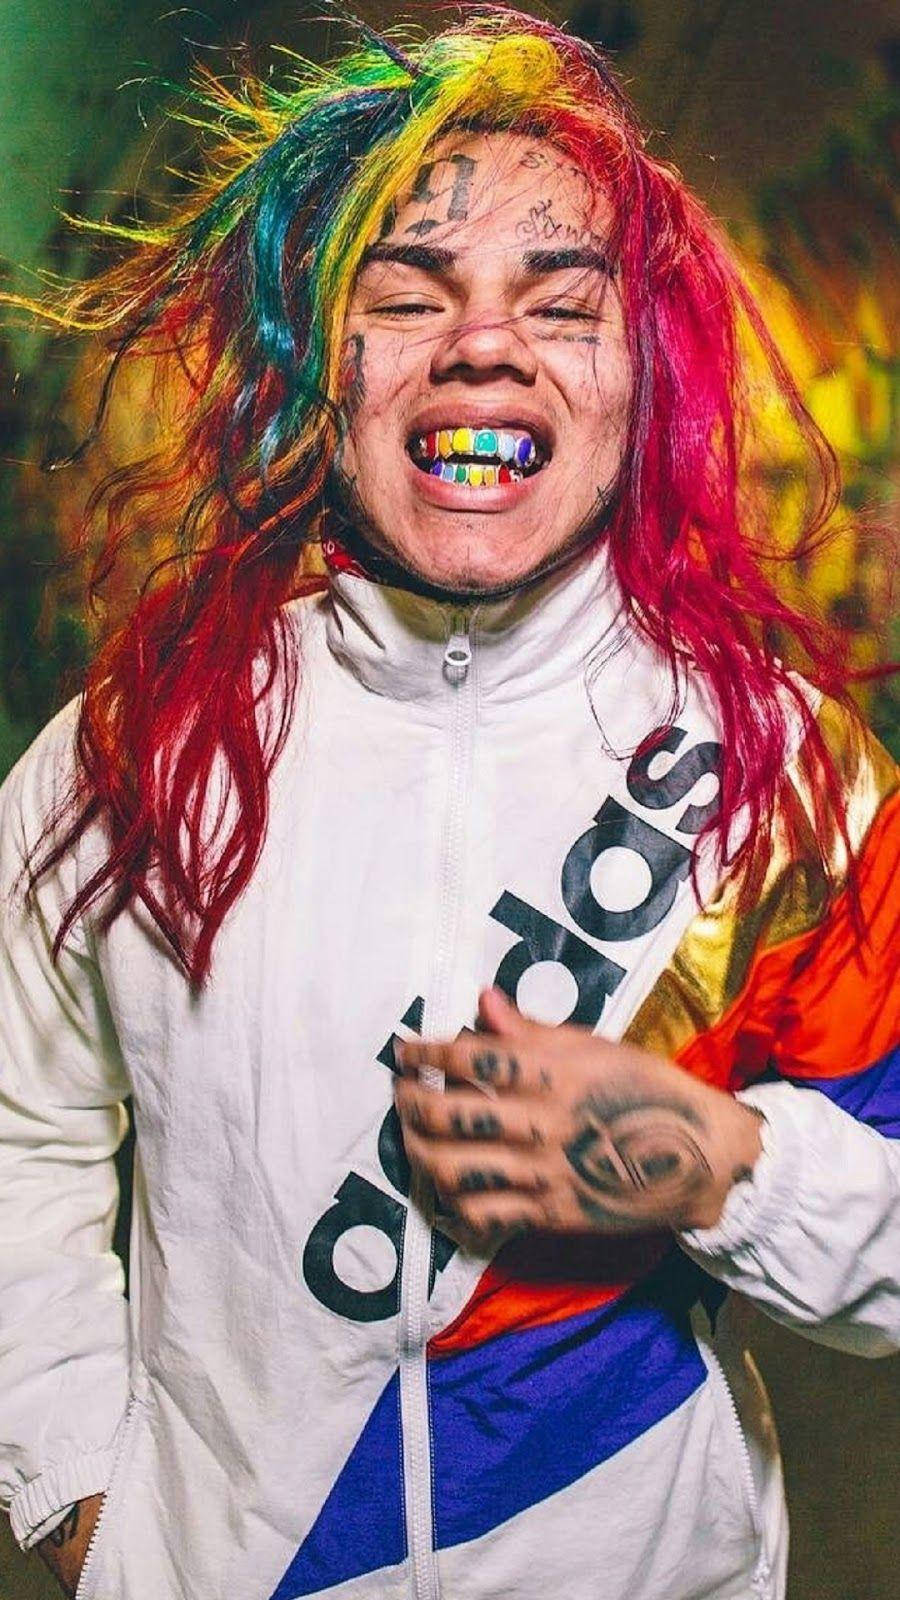 6ix9ine Shows Off His Grills Background